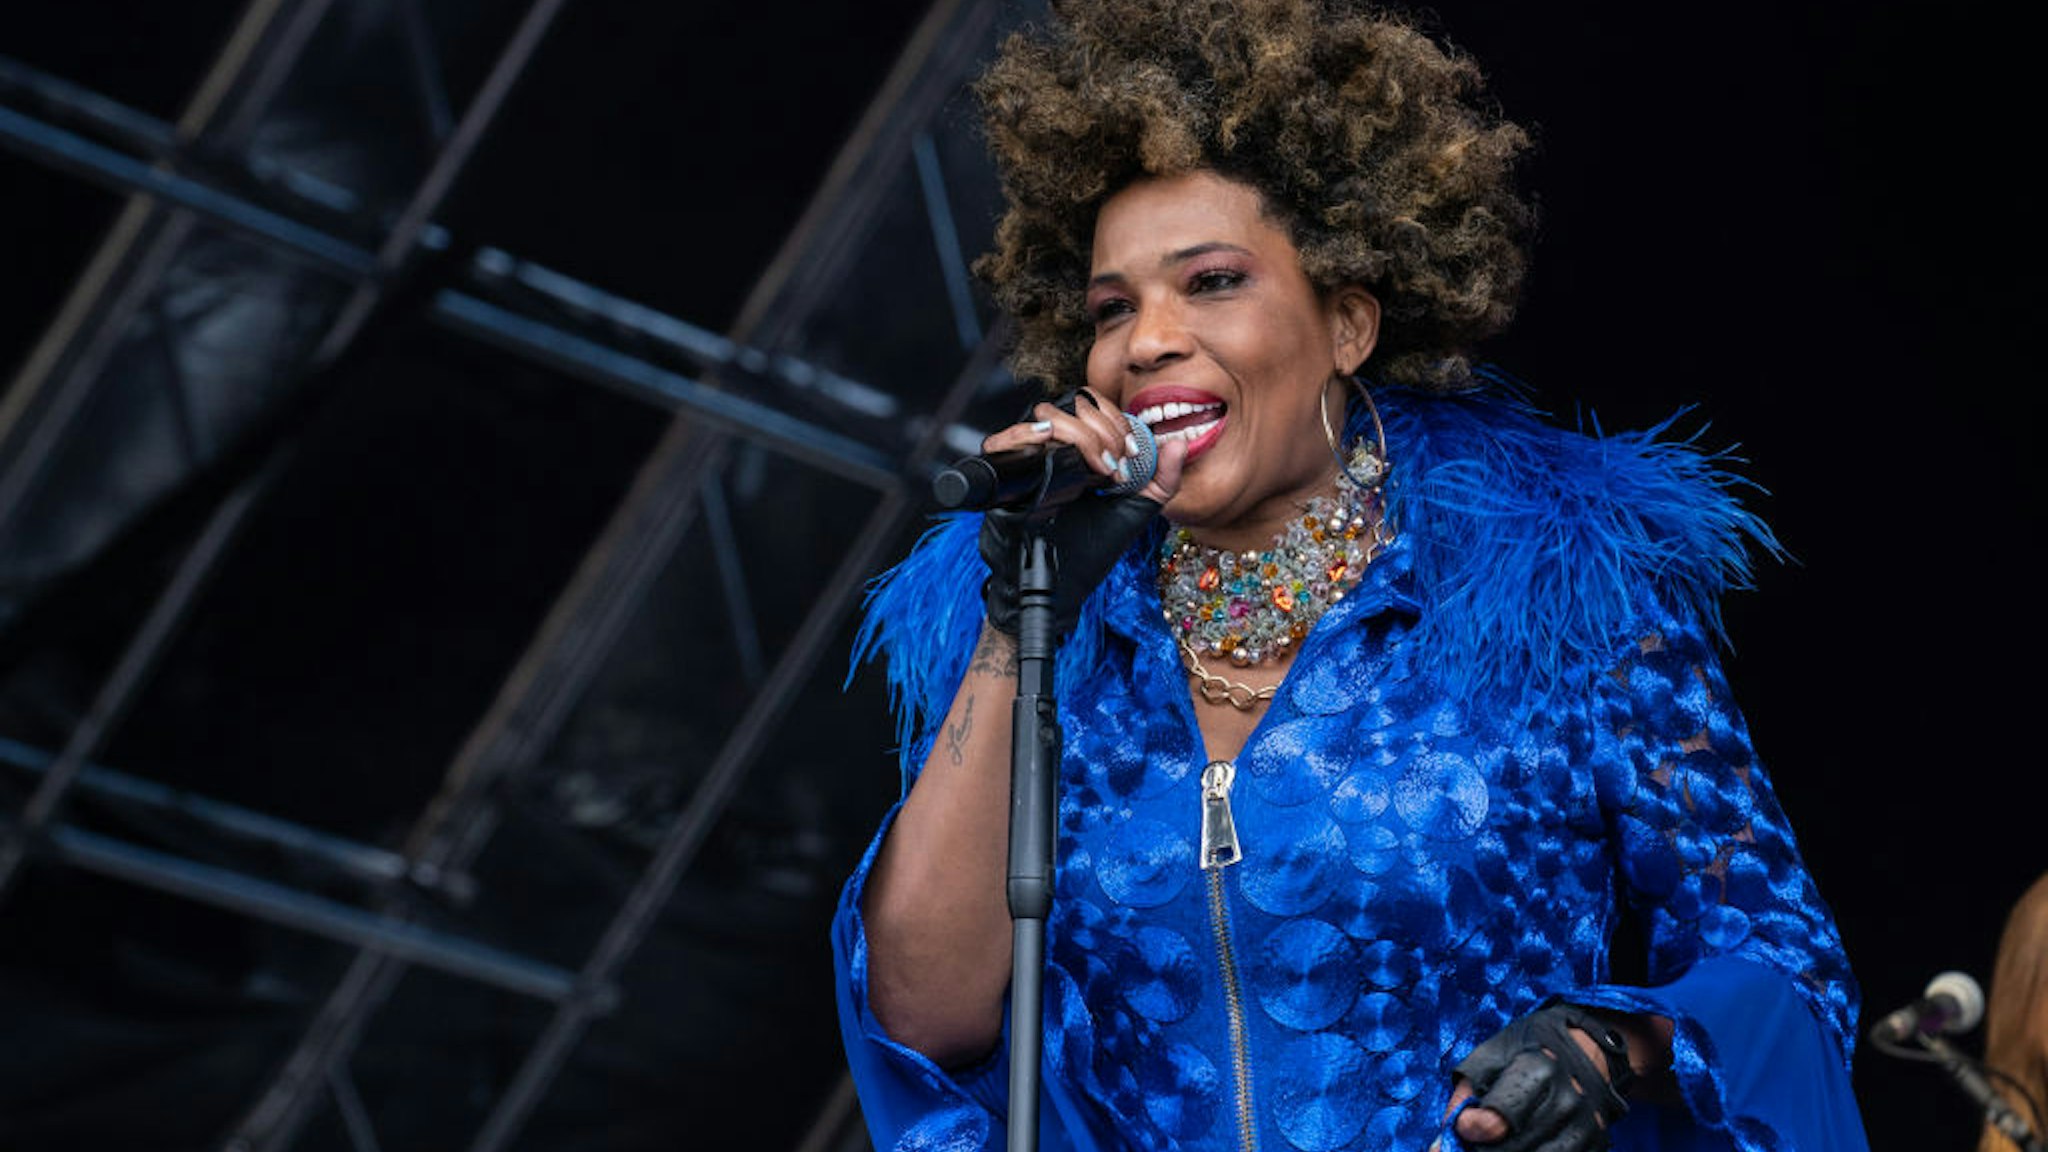 LONDON, ENGLAND - JUNE 04: Macy Gray performs at Mighty Hoopla at Brockwell Park on June 04, 2022 in London, England. (Photo by Lorne Thomson/Redferns)